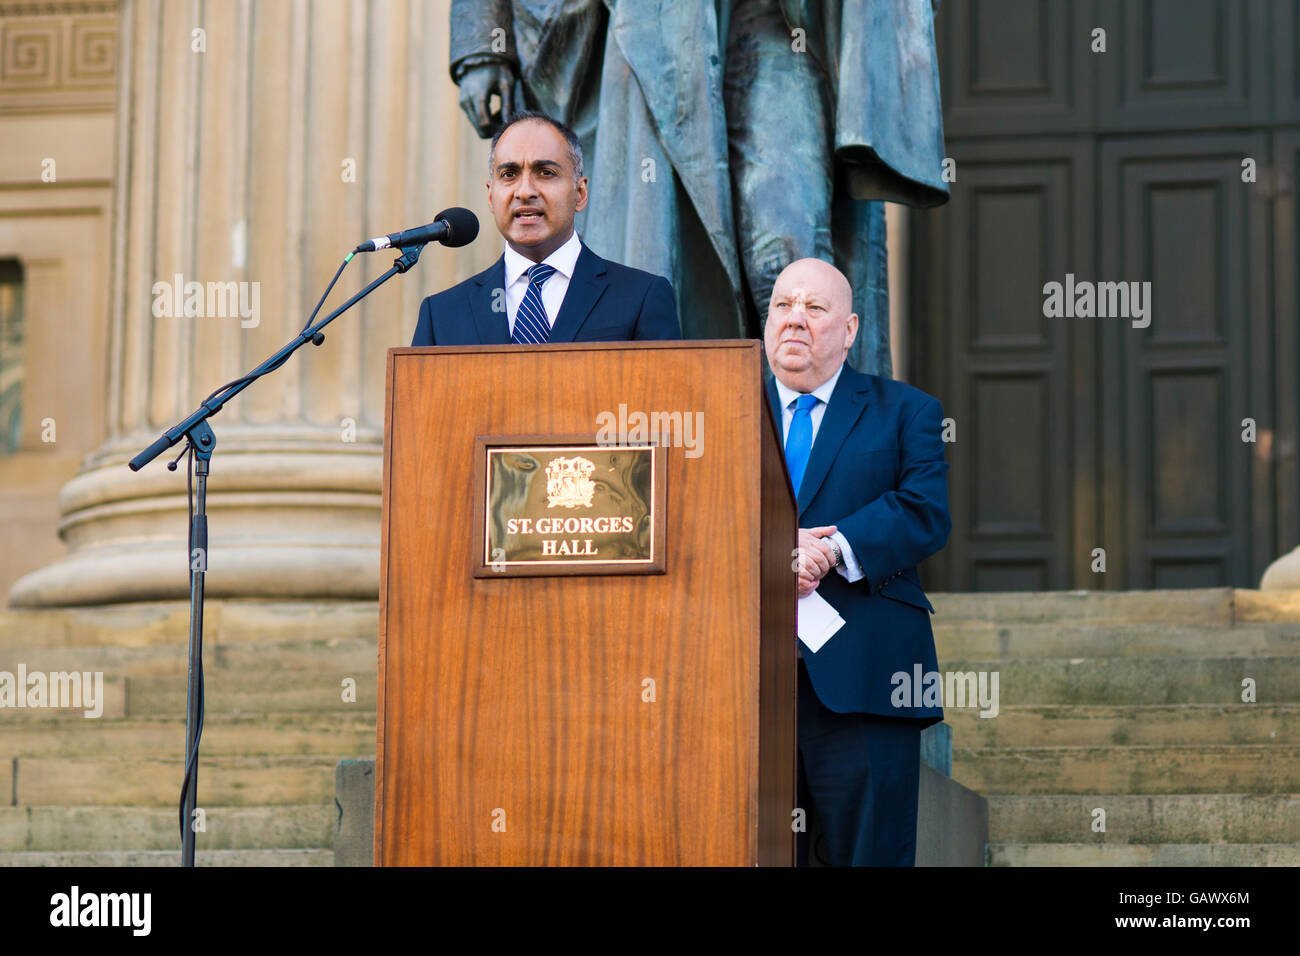 Liverpool, UK, 5th June 2016. A pro equality speaker at the Liverpool Stands Together rally at St.George's hall promoting inclusion and equality in Liverpool post Brexit. Credit:  Hayley Blackledge/Alamy Live News/Alamy Live News Stock Photo